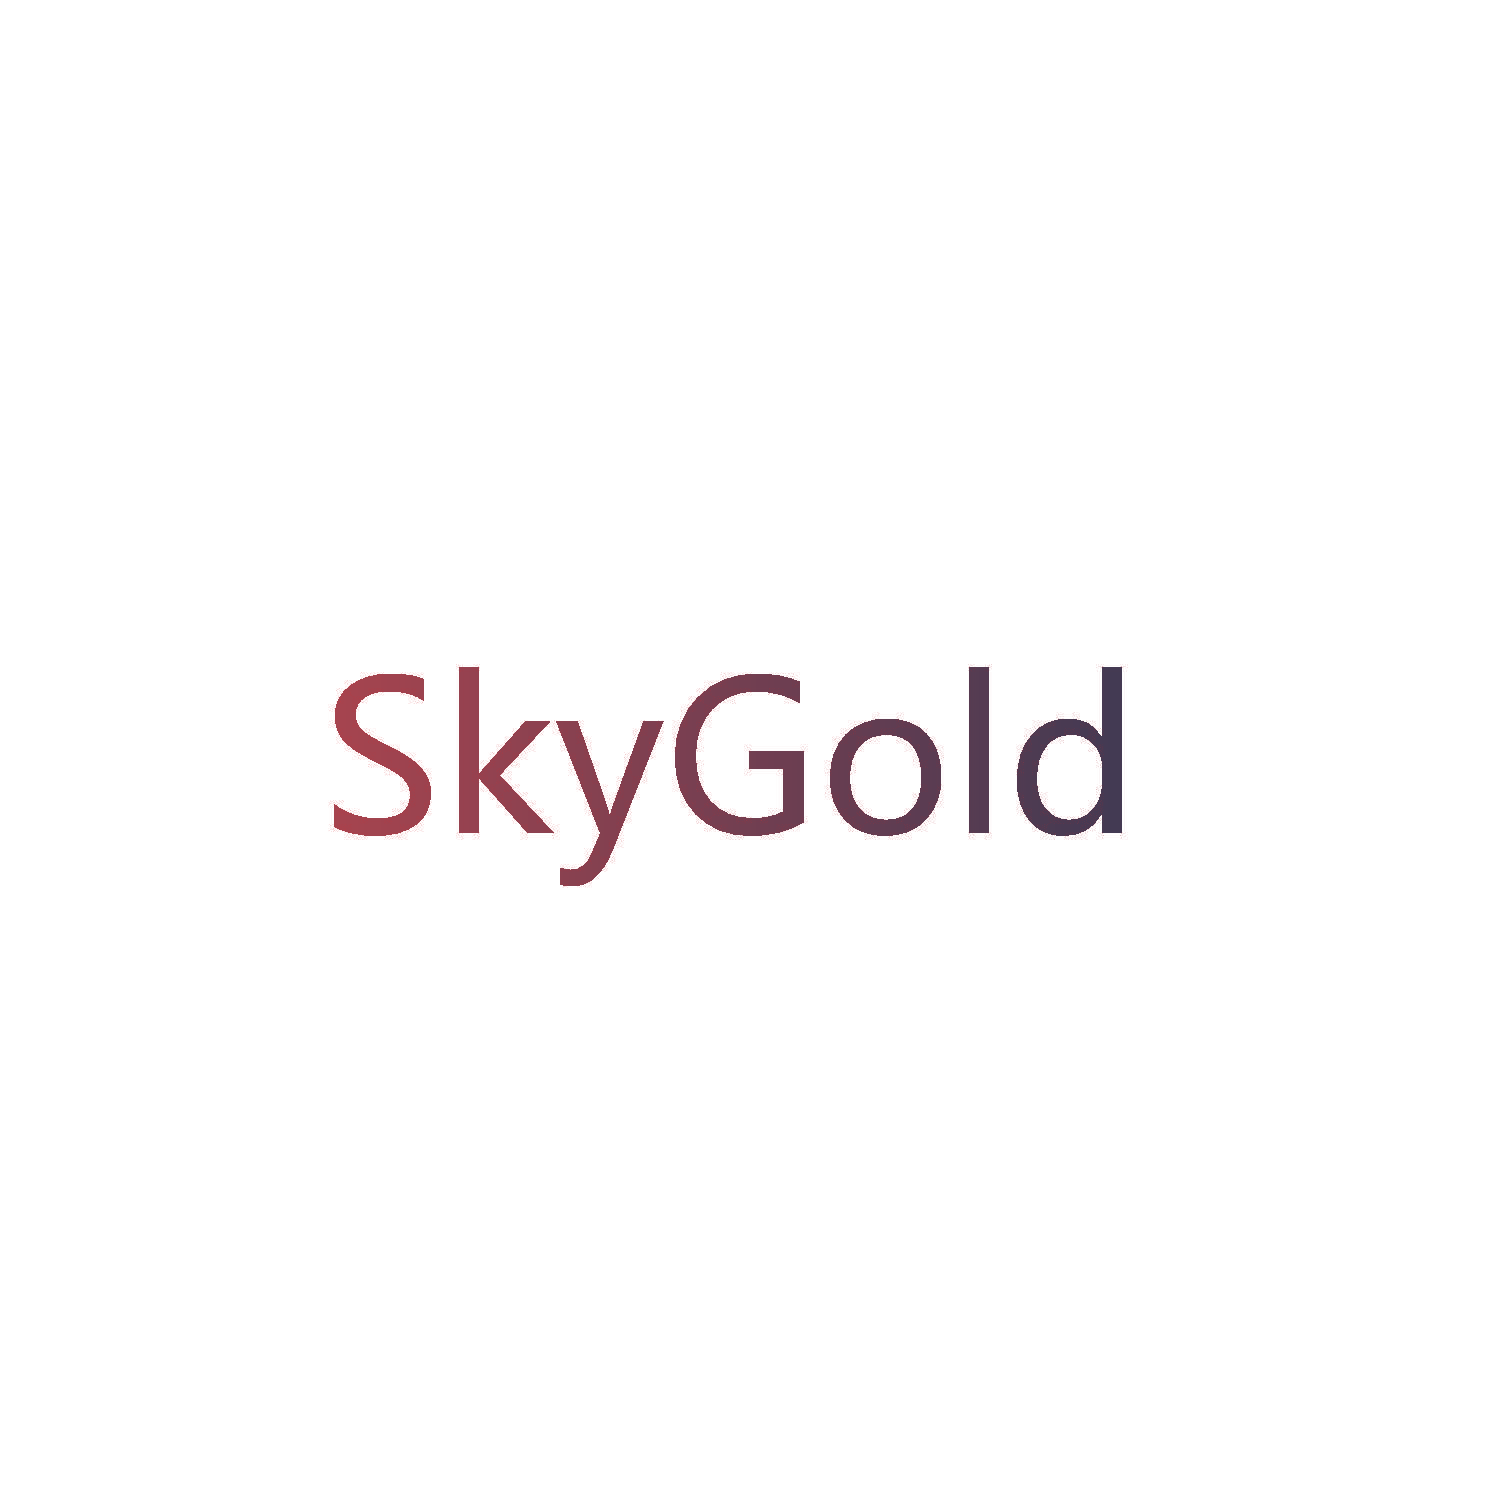 SkyGold